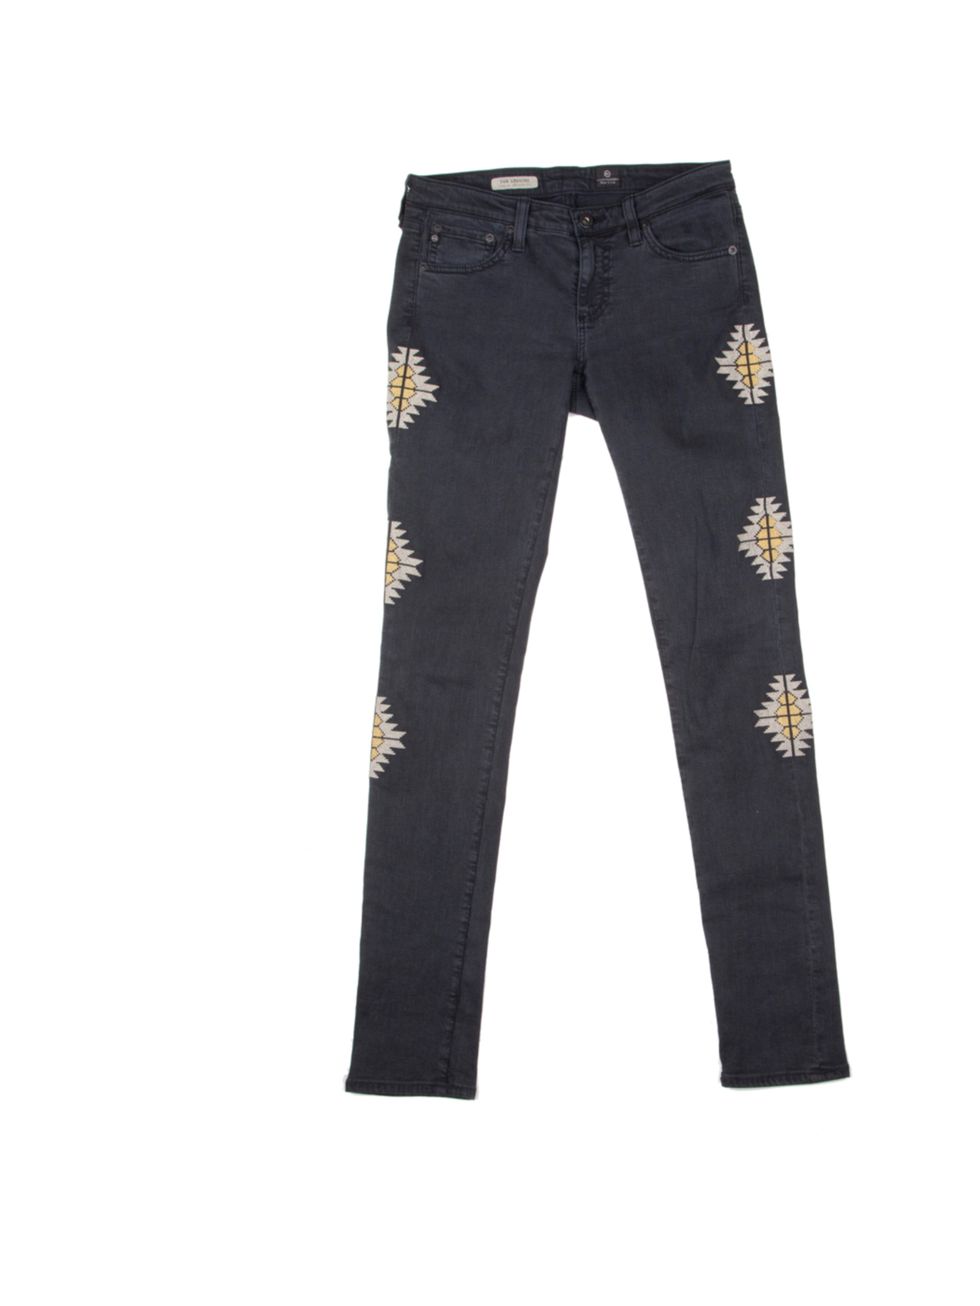 <p>Fan of the statement jean? Then these are for you Adriano Golsdchmied black Sante Fe embroidered jeans, £234, at <a href="http://www.harveynichols.com/">Harvey Nichols</a></p>